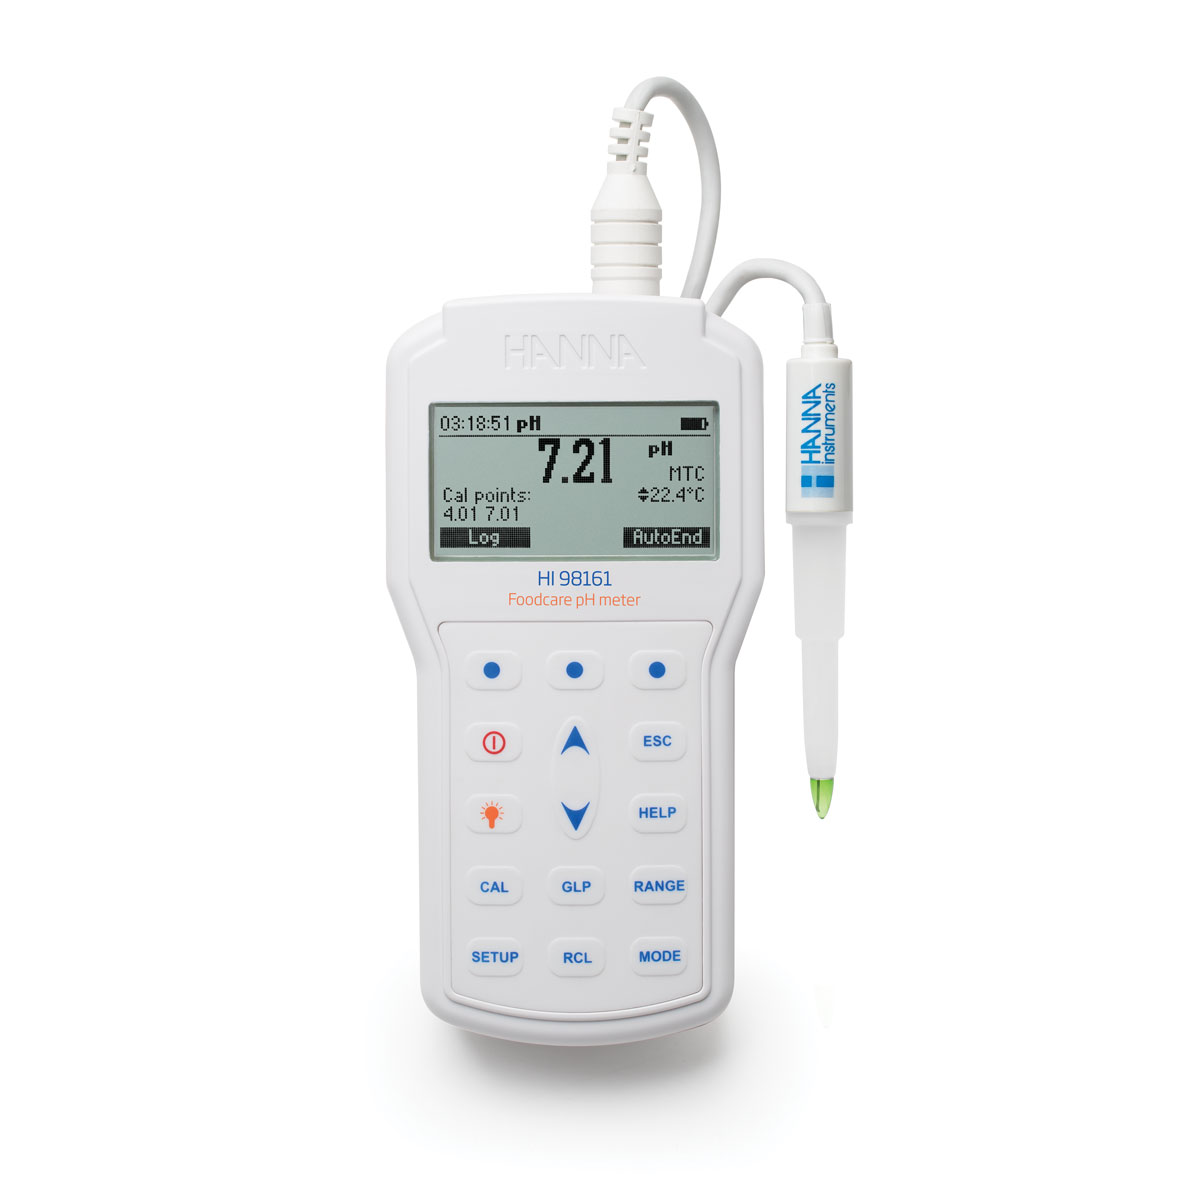 Professionelles Foodcare HACCP-Hand-pH-Meter